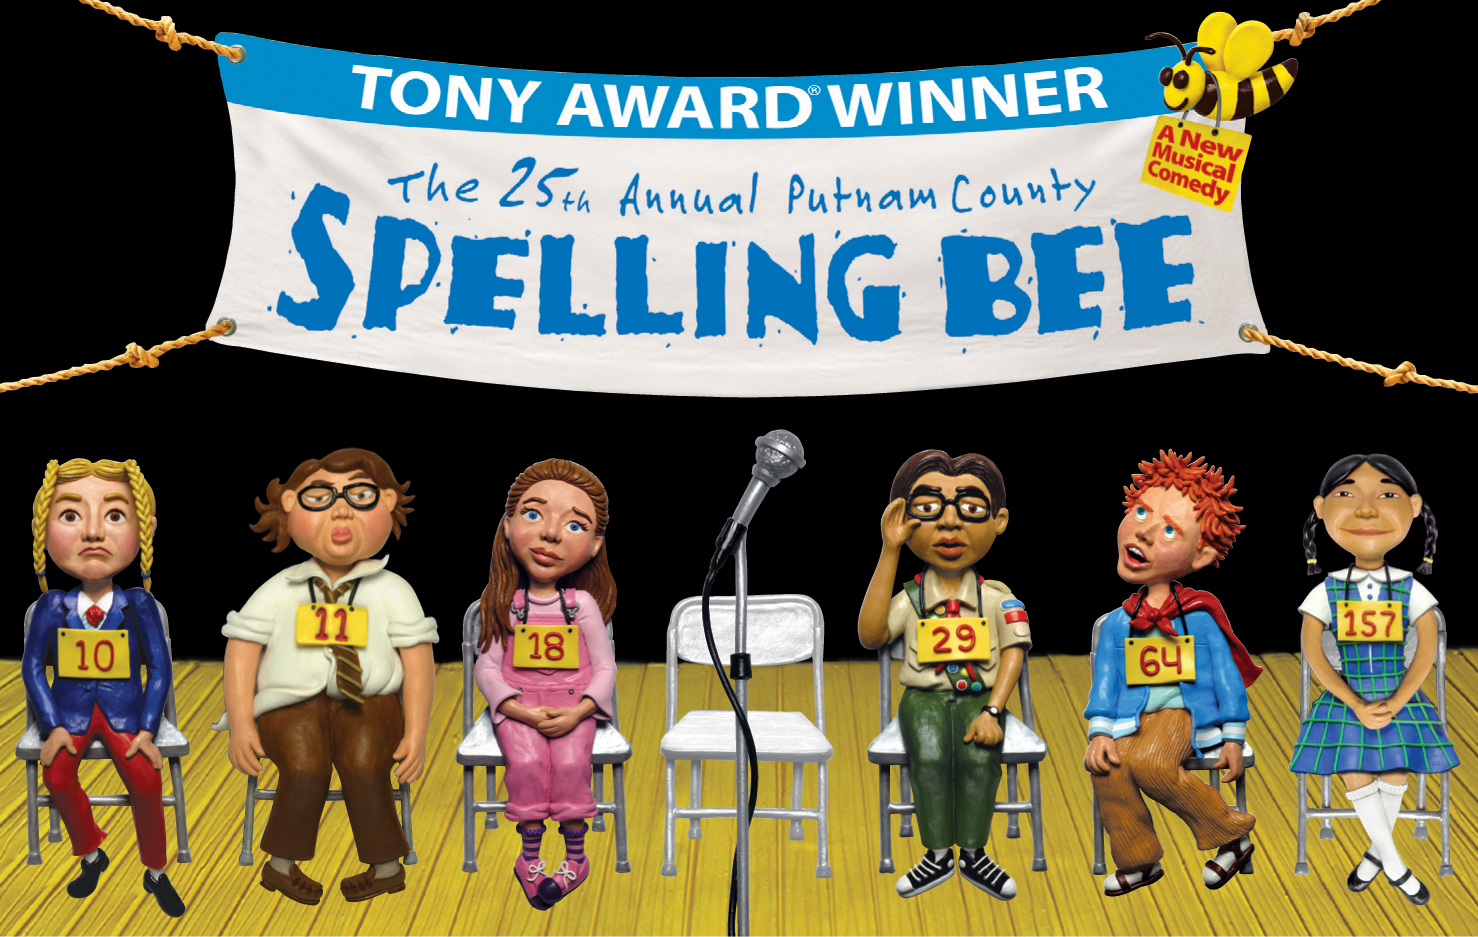 Pagosa Springs Center for the Arts is offering The 25th Annual Putnam County Spelling Bee (June 26 – August 20, 2014).